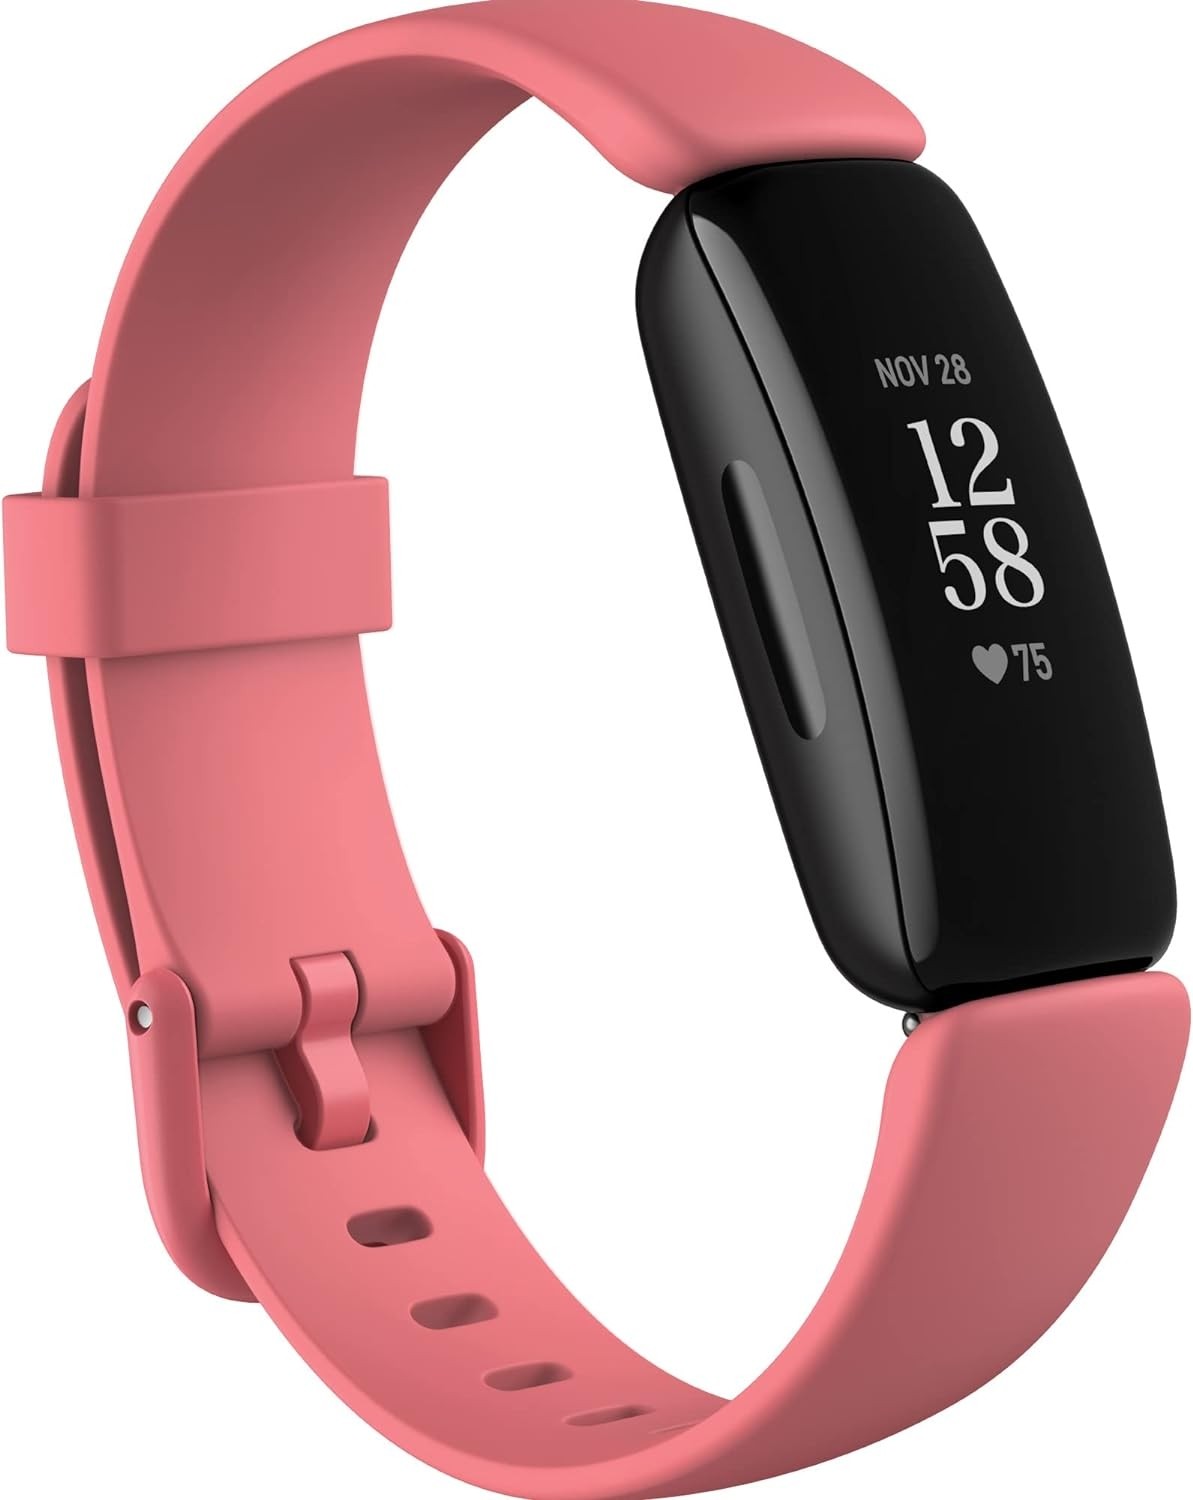 Fitbit Inspire 2 Health & Fitness Tracker with 1-Year Fitbit Premium Included, 24/7 Heart Rate & up to 10 Days Battery, Desert Rose